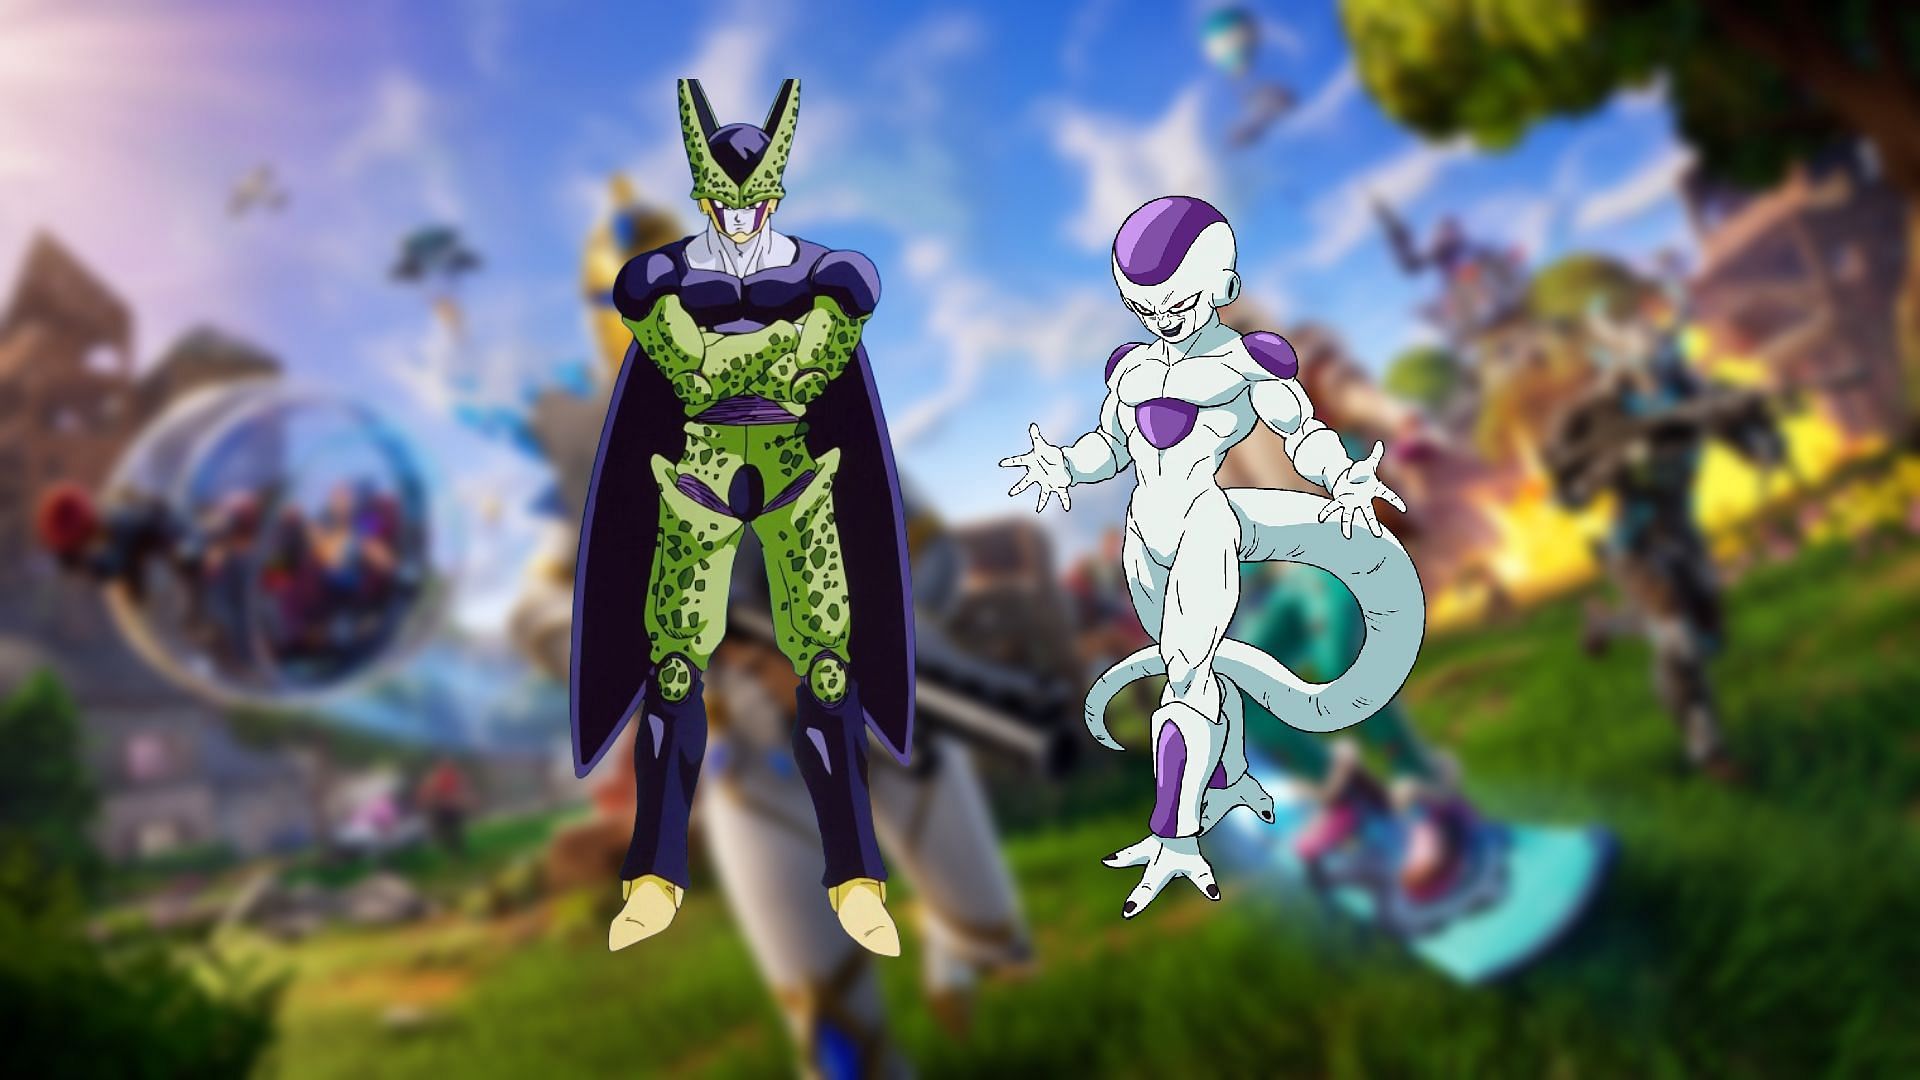 Fortnite x Dragon Ball collaboration to bring Frieza and Cell skins